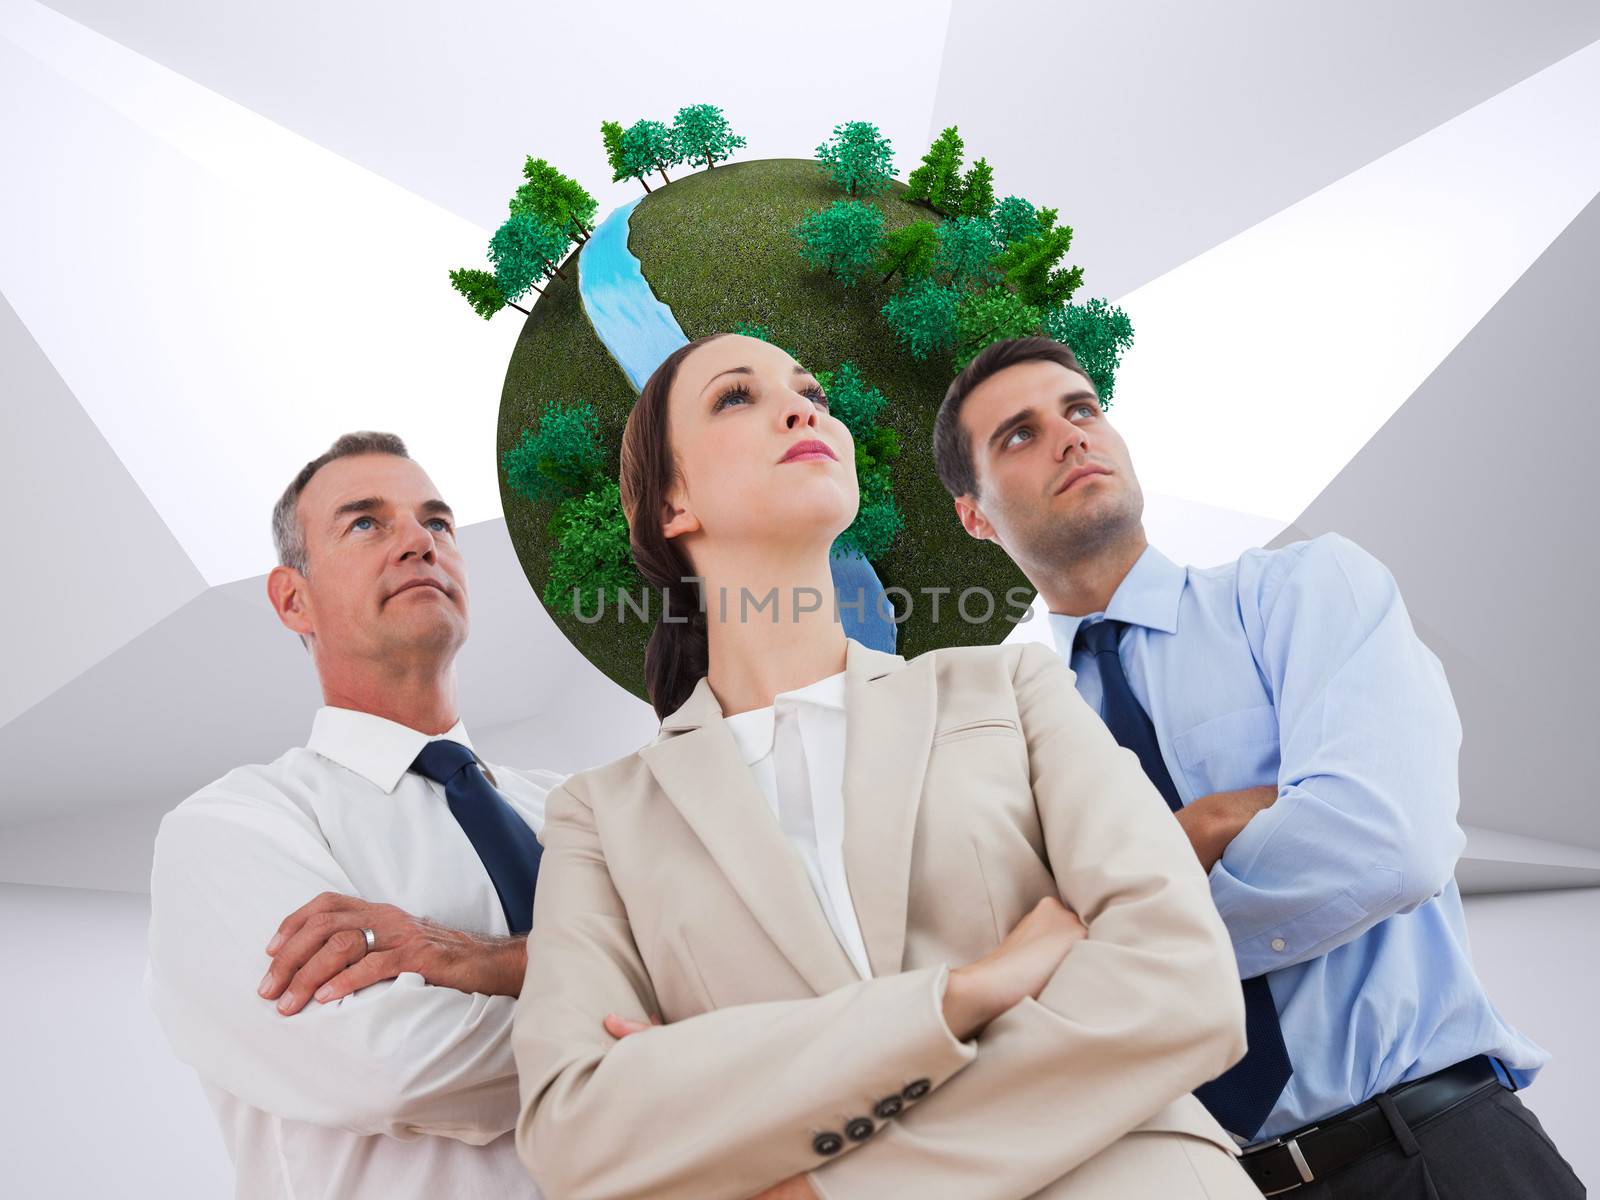 Composite image of serious work team posing together looking away